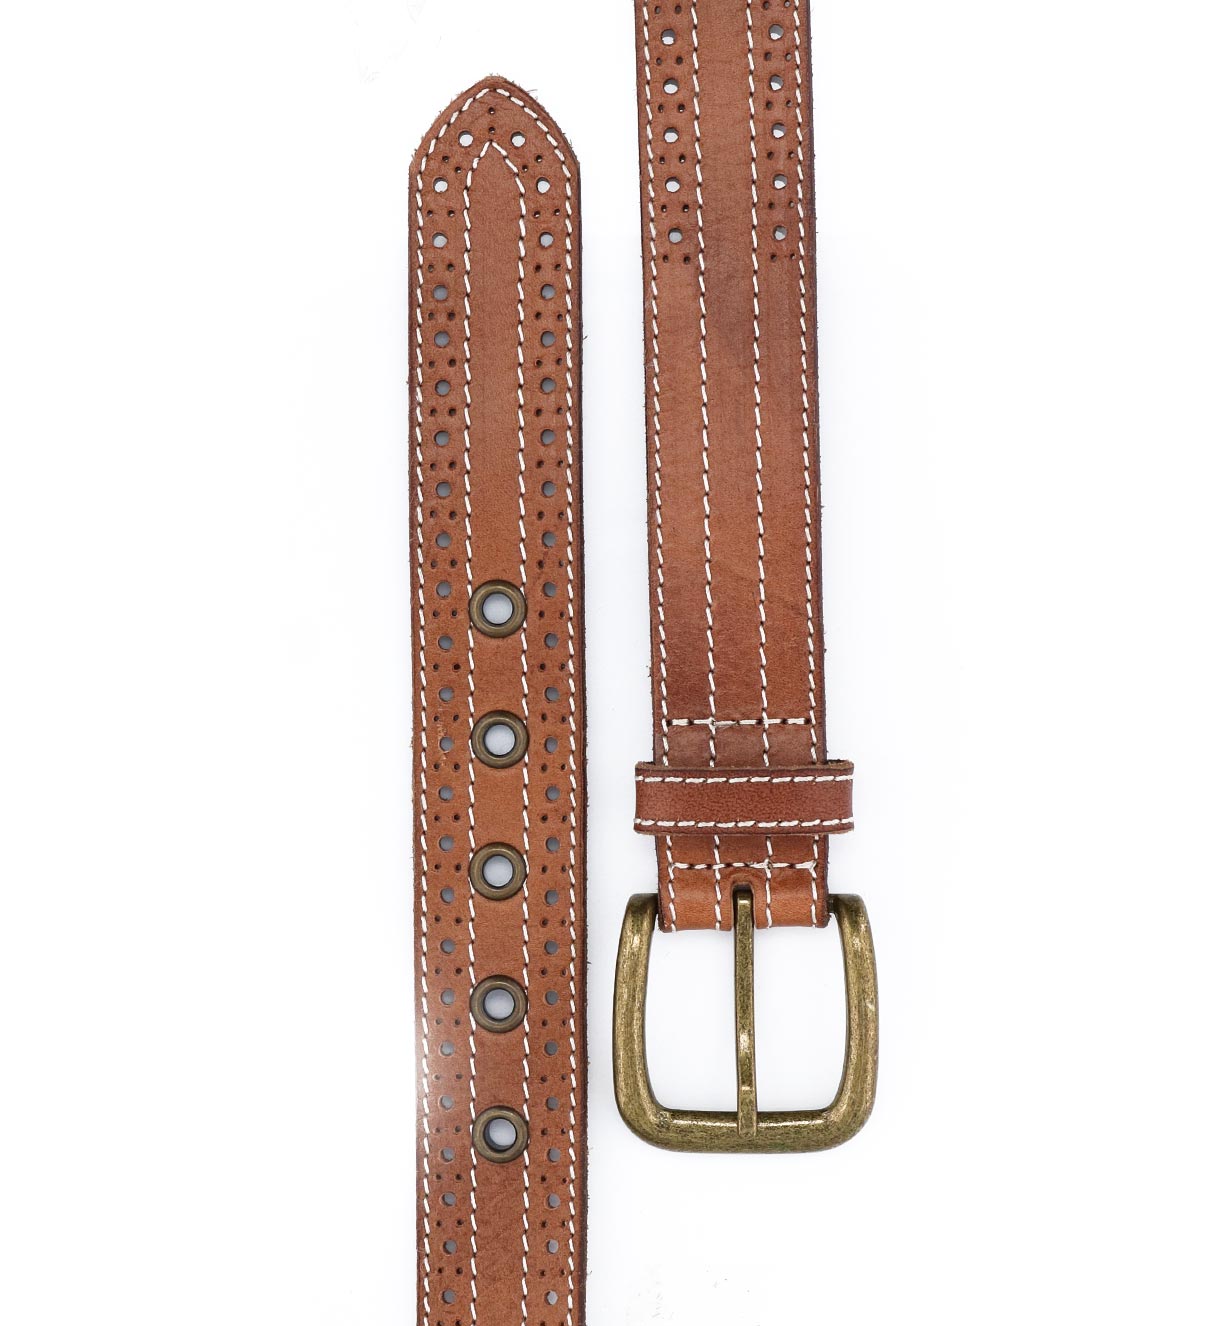 A Addison tan leather belt with silver grommets by Bed Stu.